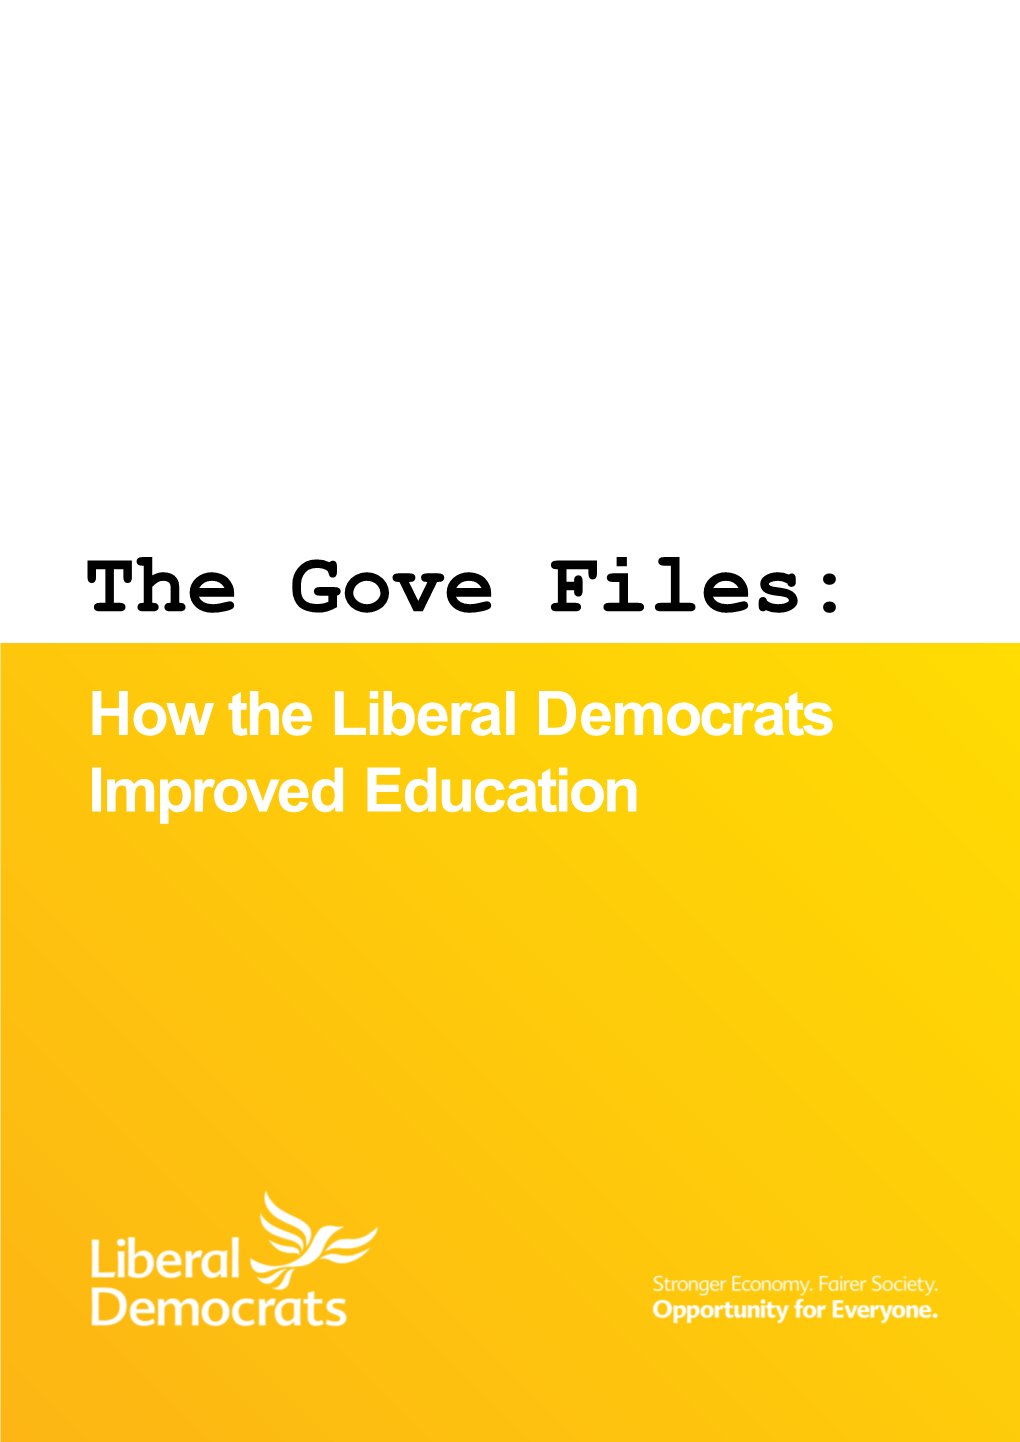 The Gove Files: How the Liberal Democrats Improved Education